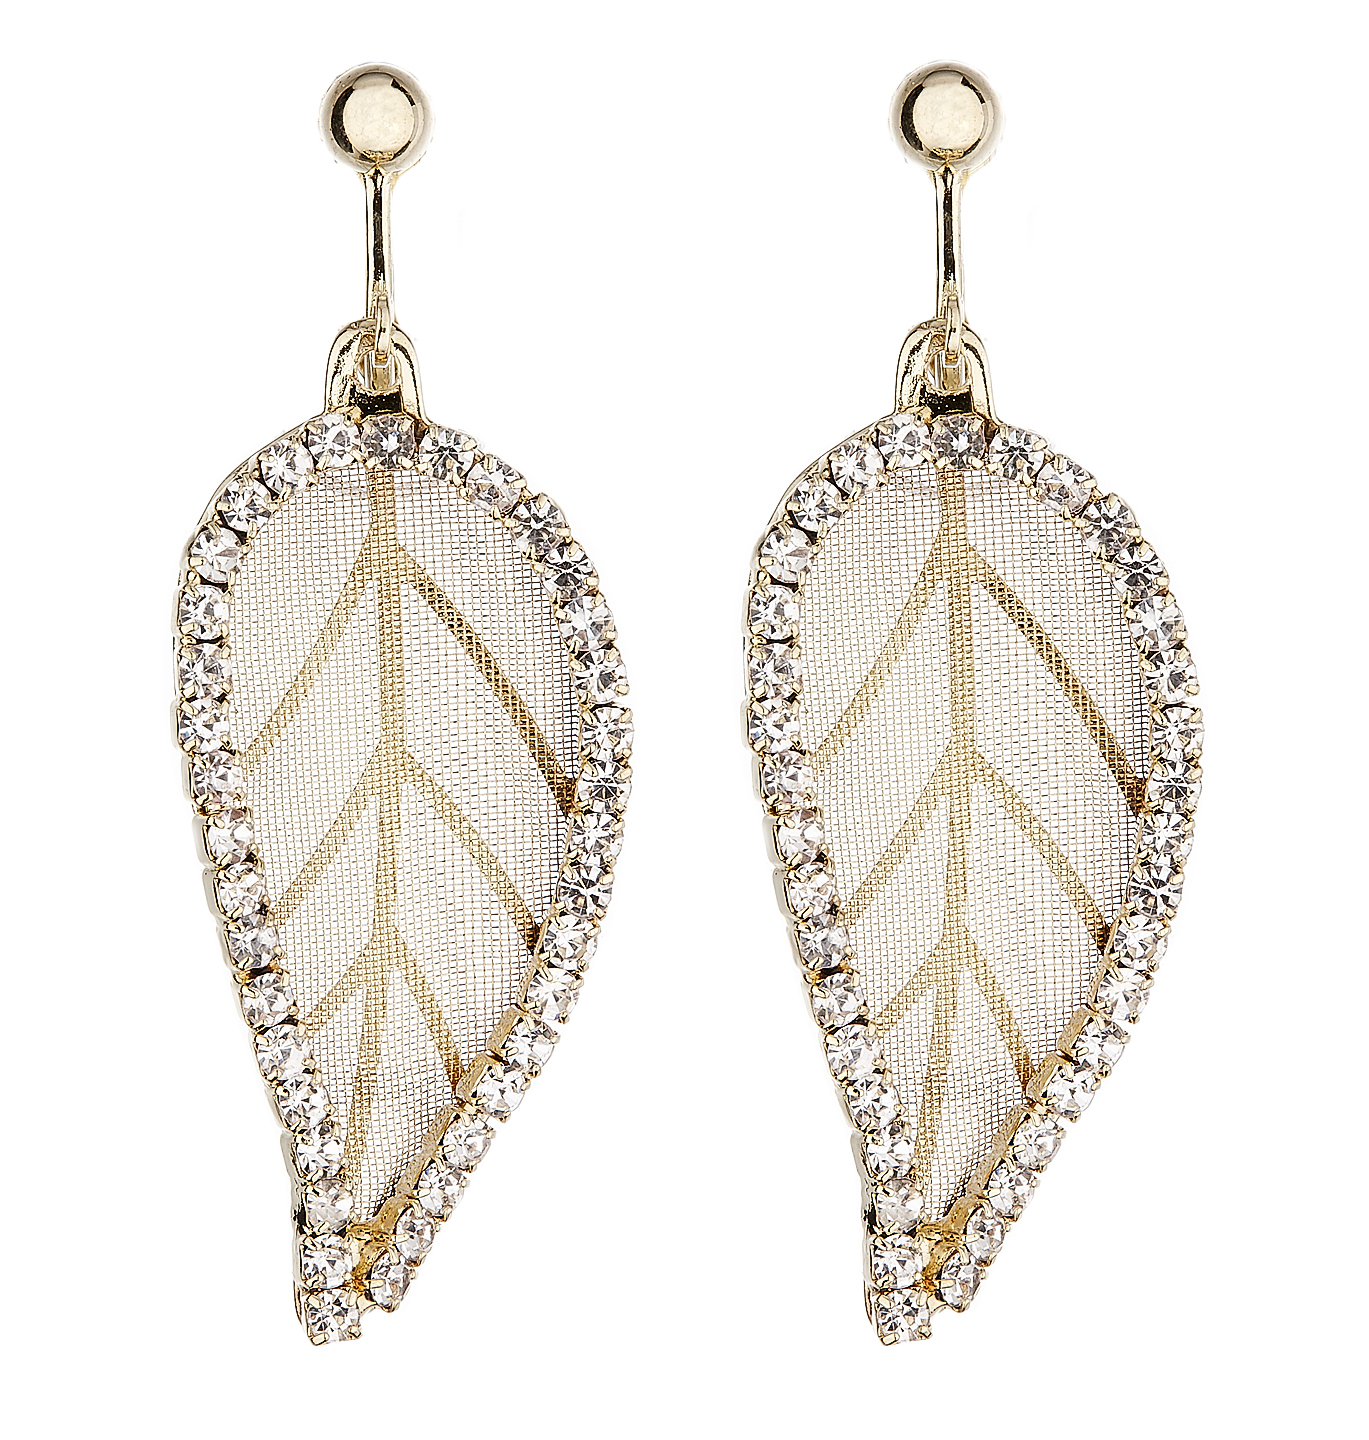 Clip On Earrings - Kaede - gold plated leaf earring with clear crystals